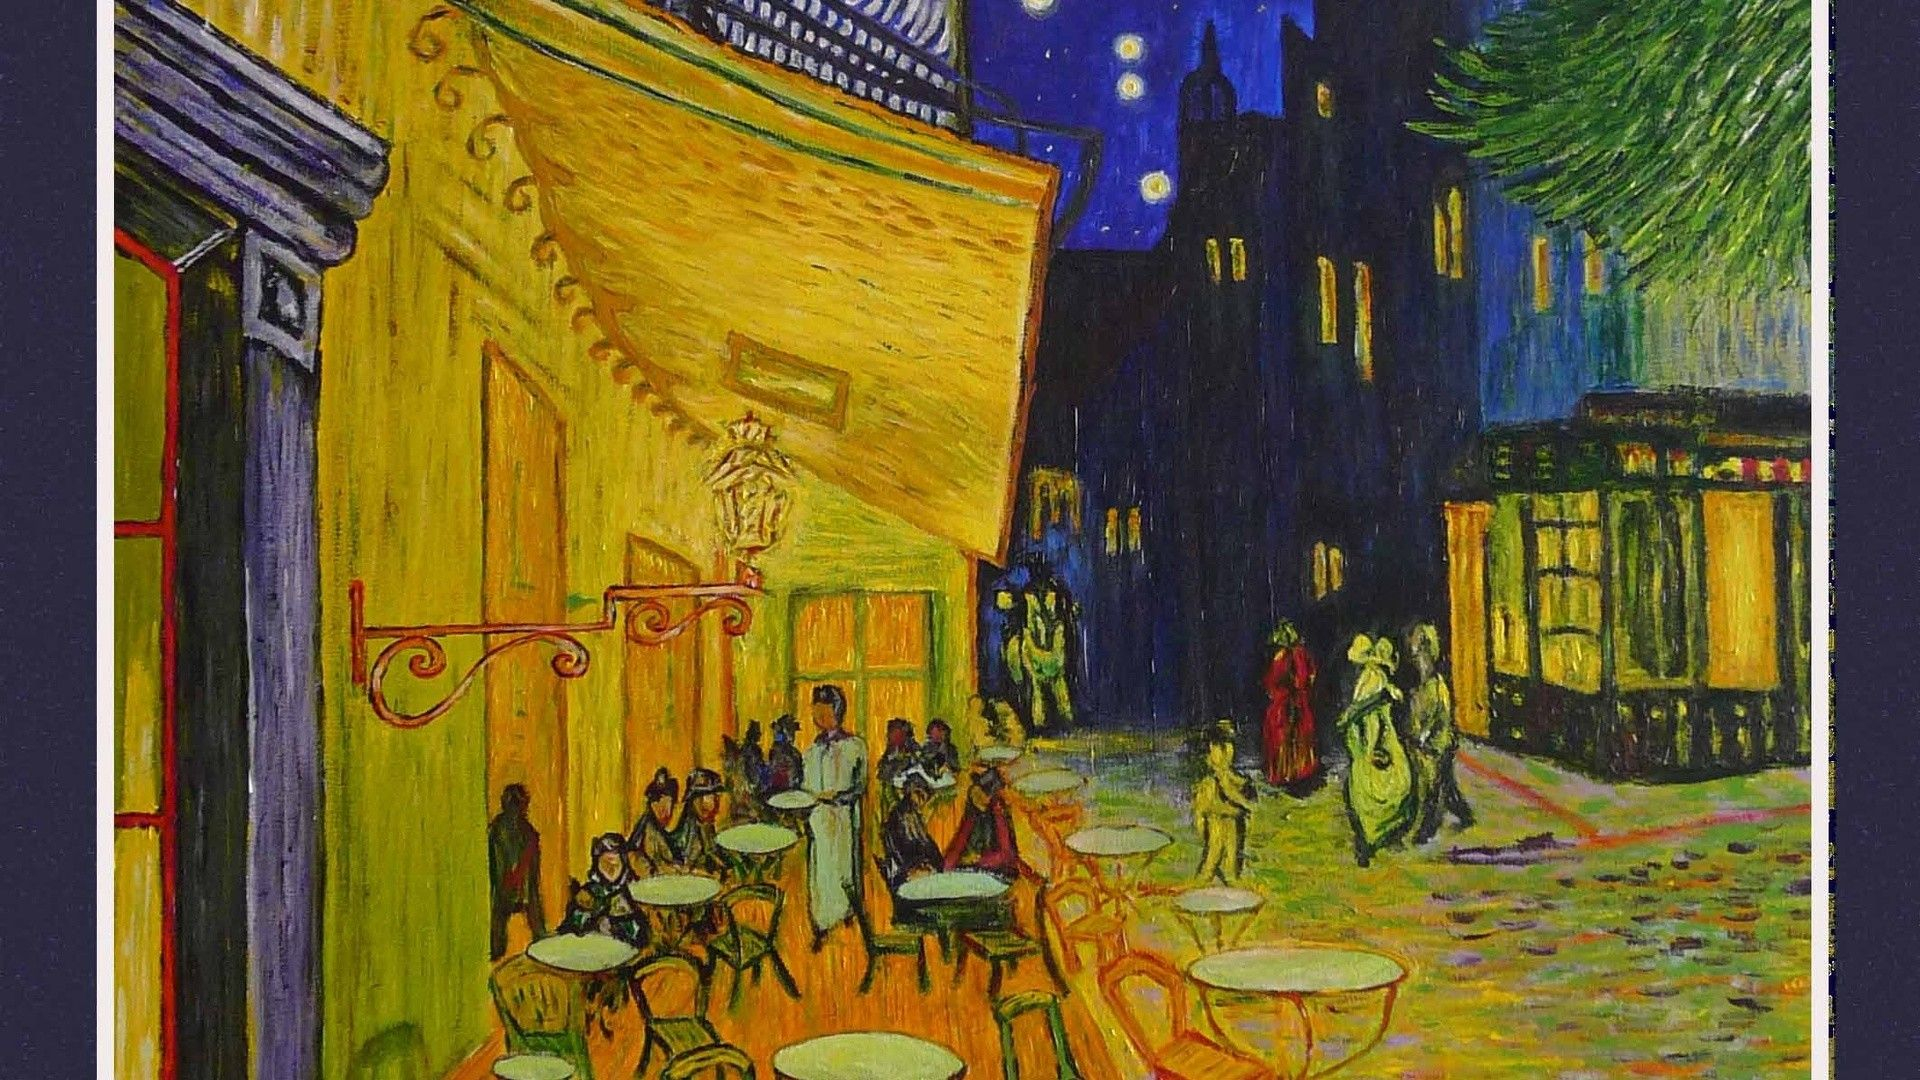 1920x1080 wallpapers 60; van gogh cafe terrace at night cafe night van gogh; computer ... | Van gogh wallpaper, Van gogh, Painting wallpaper